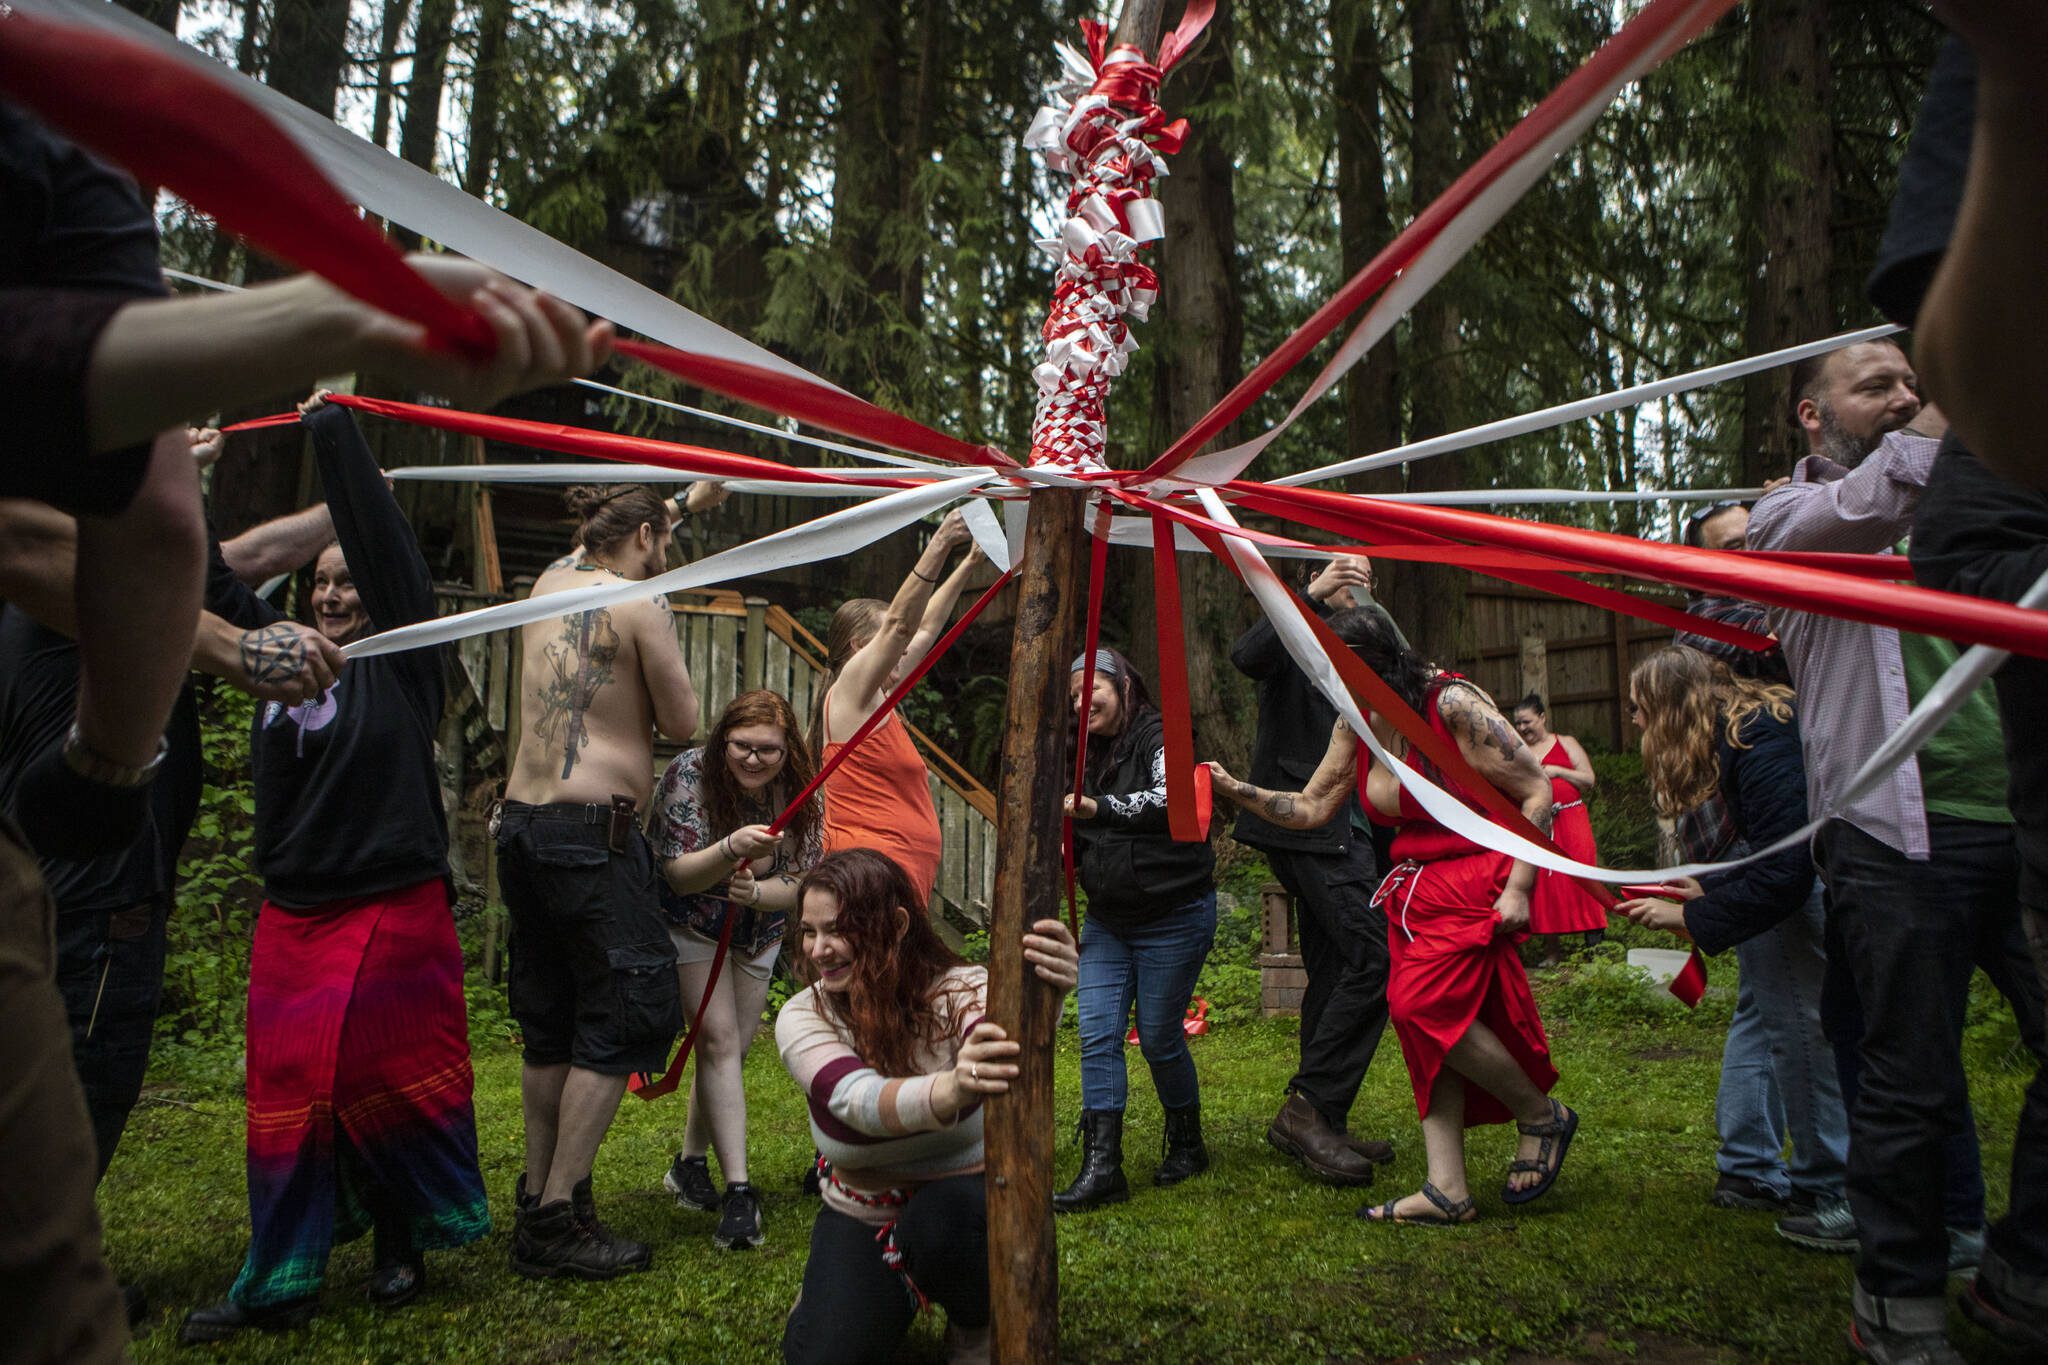 Titania ThunderLily, center, holds the maypole as Pagan revelers wrap red-and-white ribbon around it for a Beltane festival in May 2023, at the Aquarian Tabernacle Church in Index, Washington. Beltane celebrates the height of spring. (Annie Barker / The Herald)